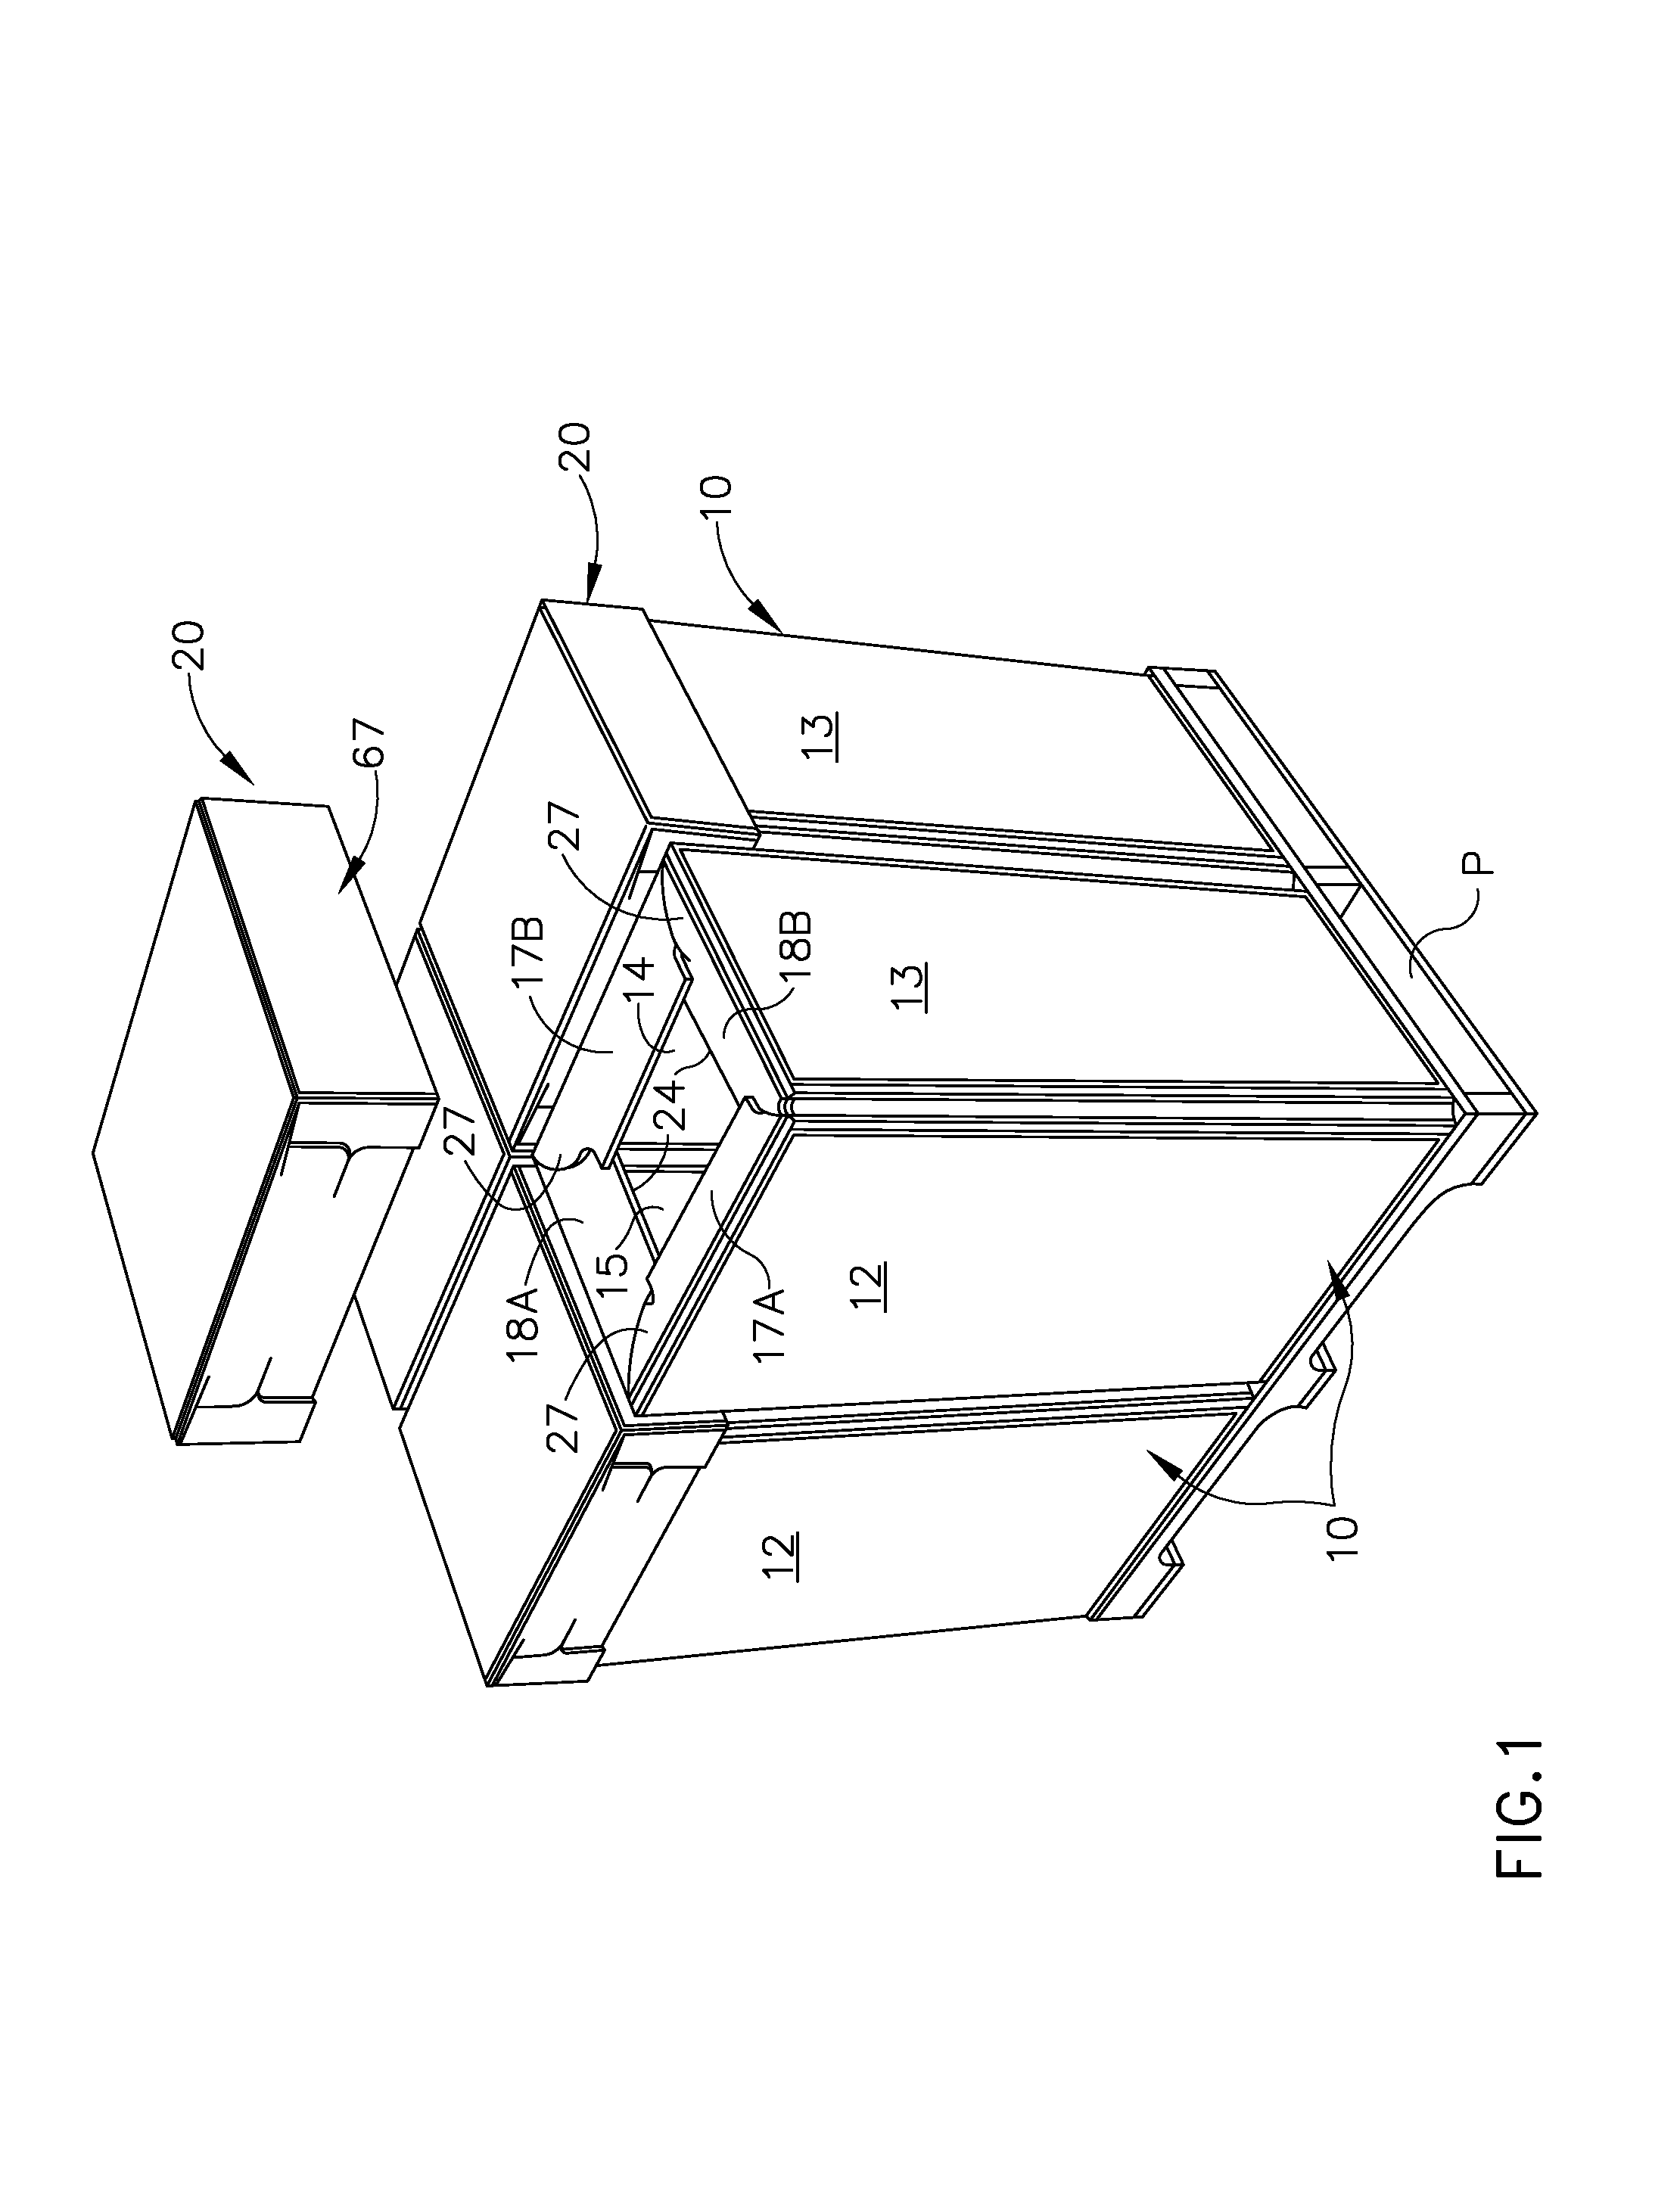 Reinforced cross-laminated bulk container